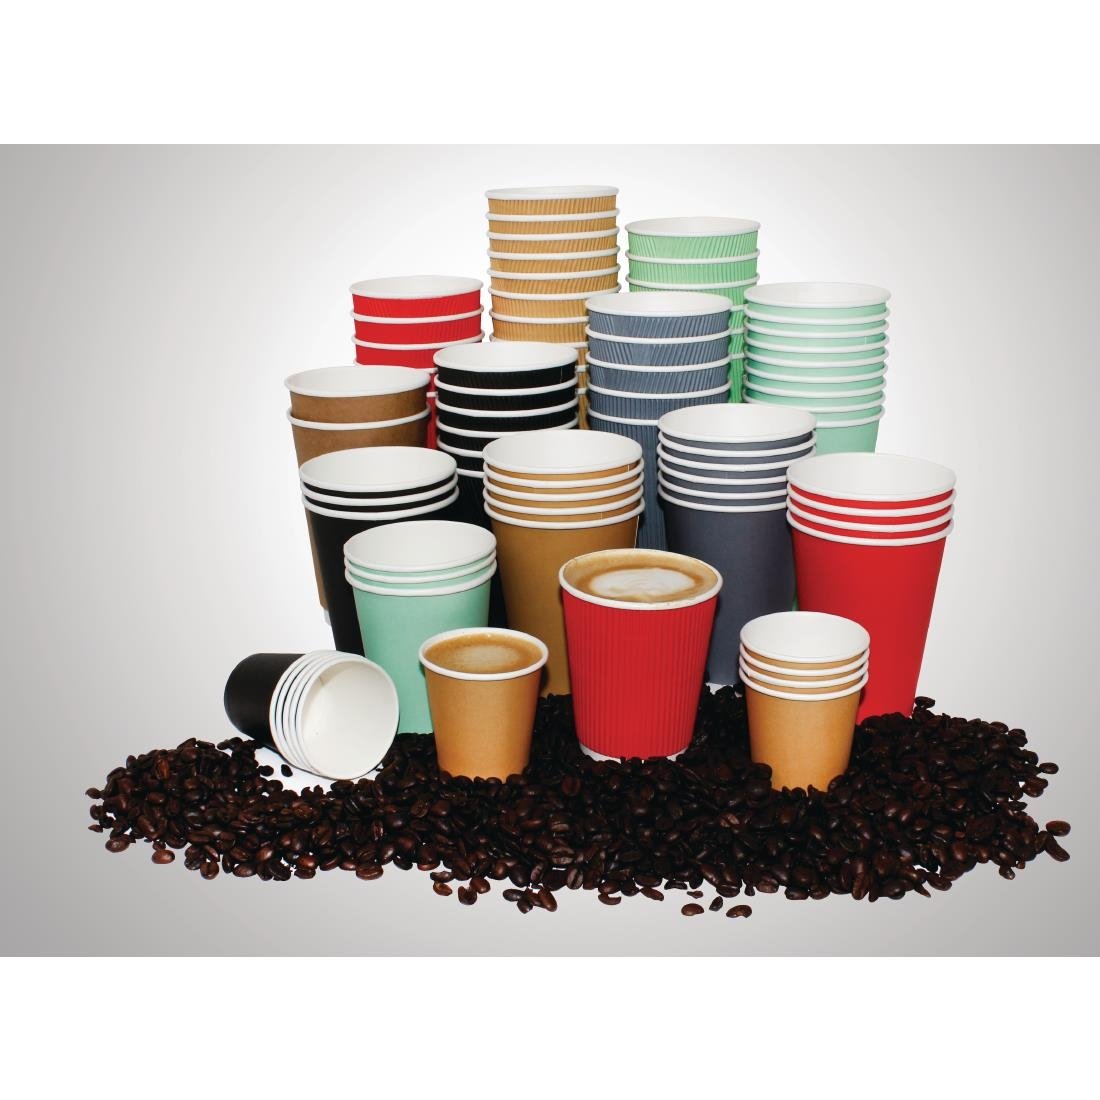 GP404 Fiesta Recyclable Single Wall Takeaway Coffee Cups Turquoise 340ml / 12oz (Pack of 1000) JD Catering Equipment Solutions Ltd